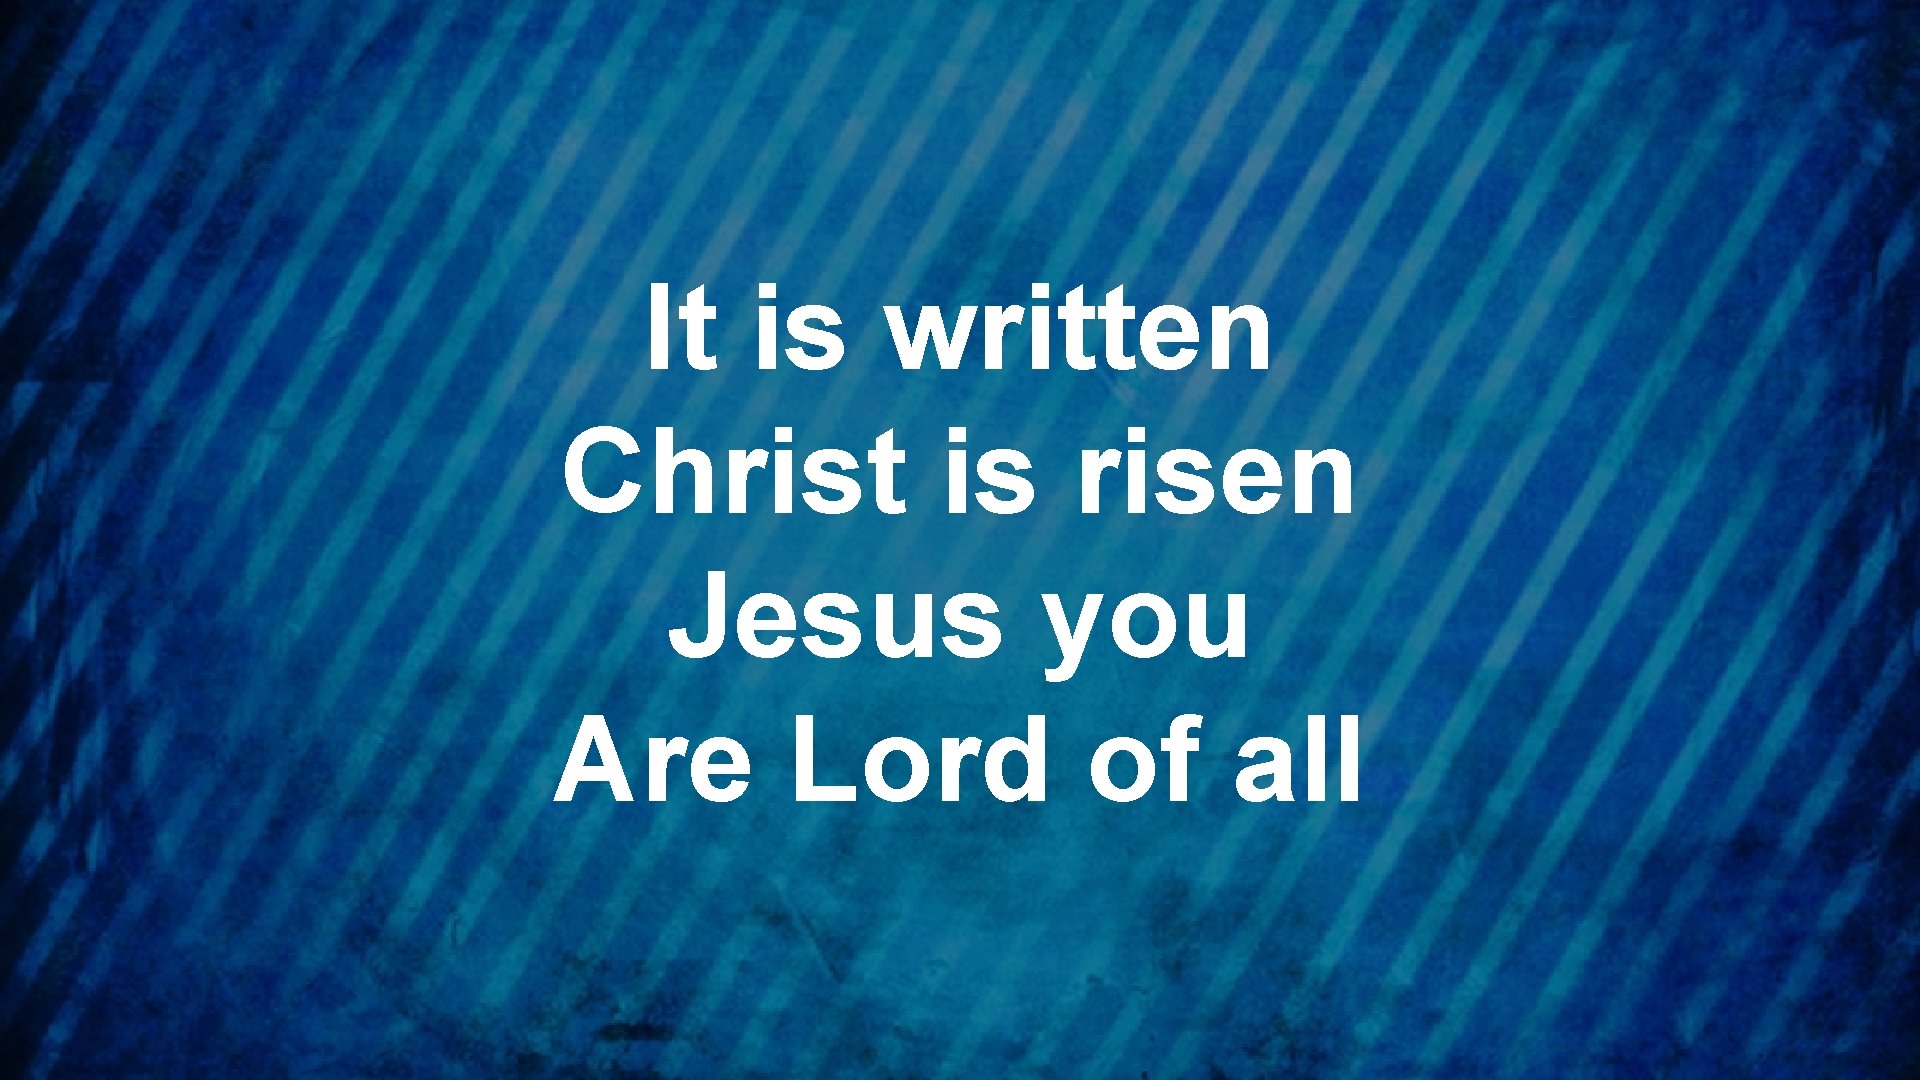 It is written Christ is risen Jesus you Are Lord of all 